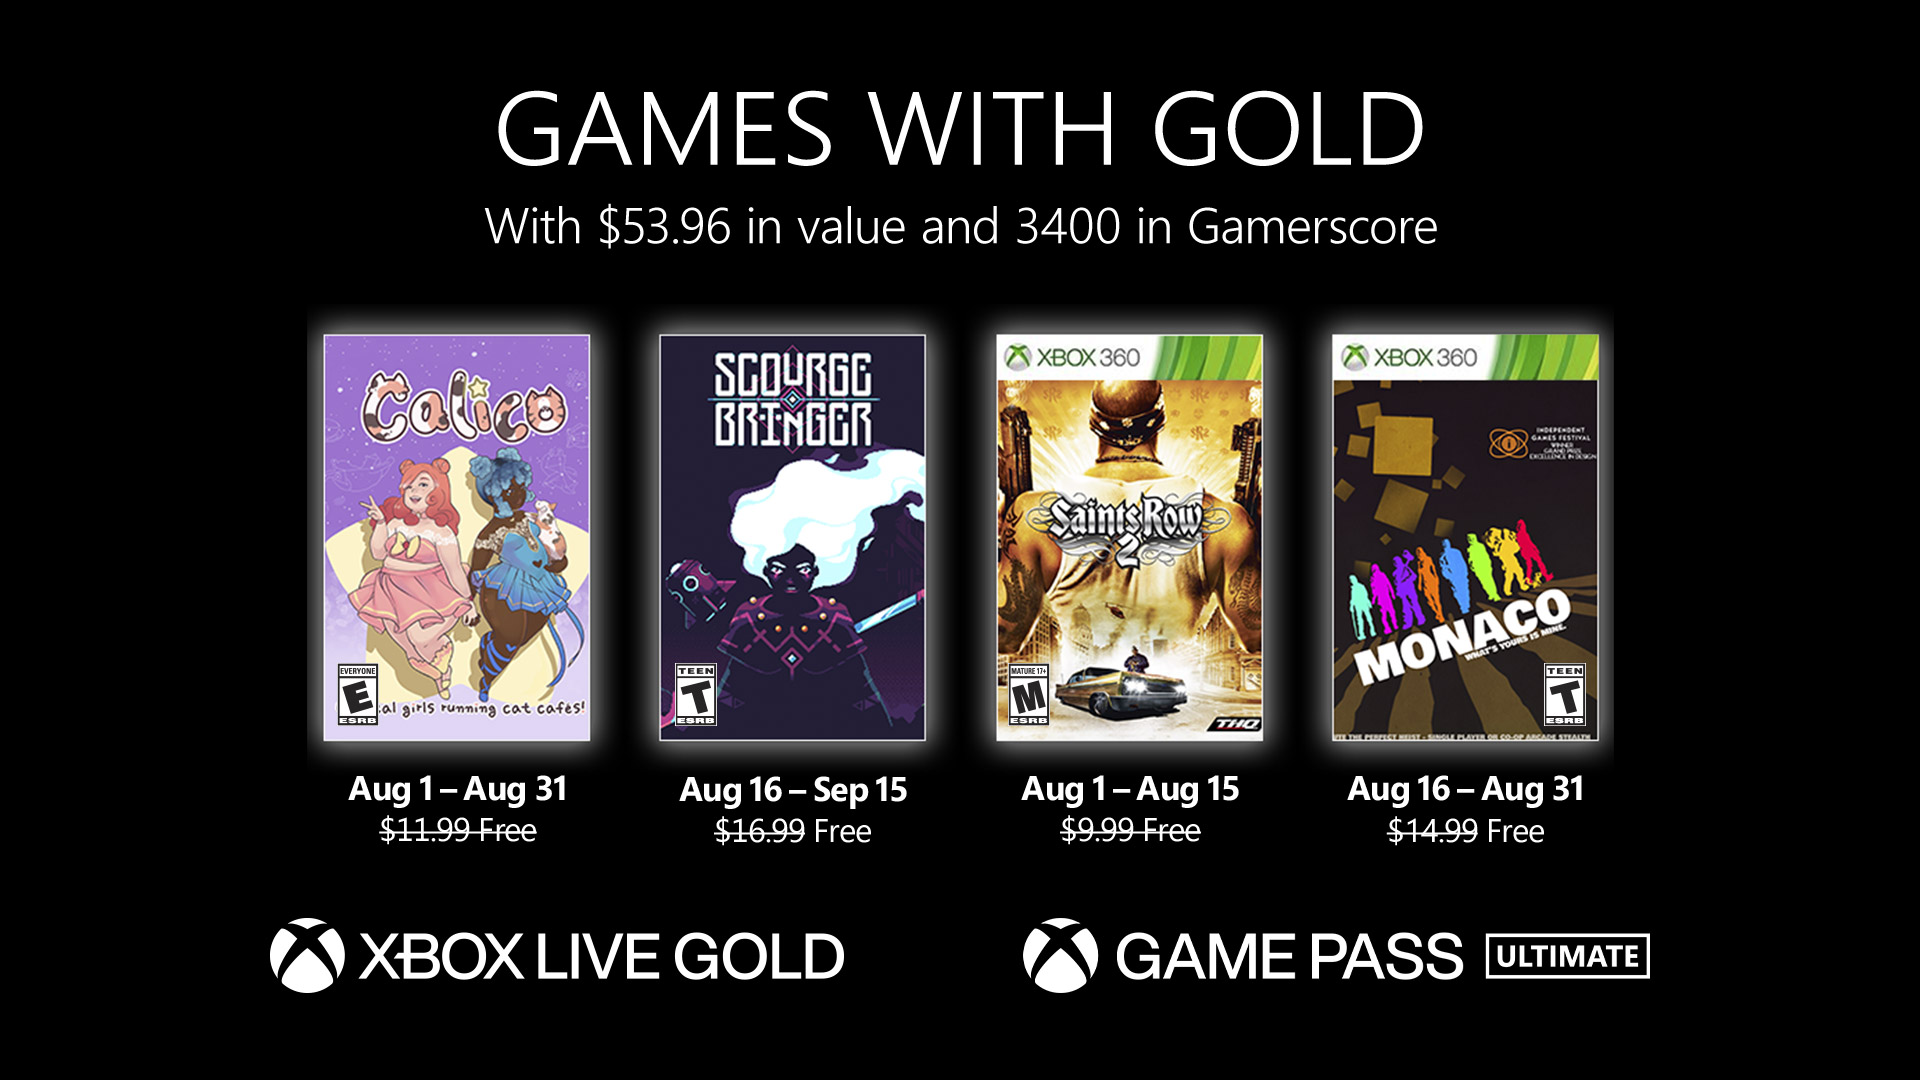 August Xbox Live Gold picks include Calico and Saints Row 2